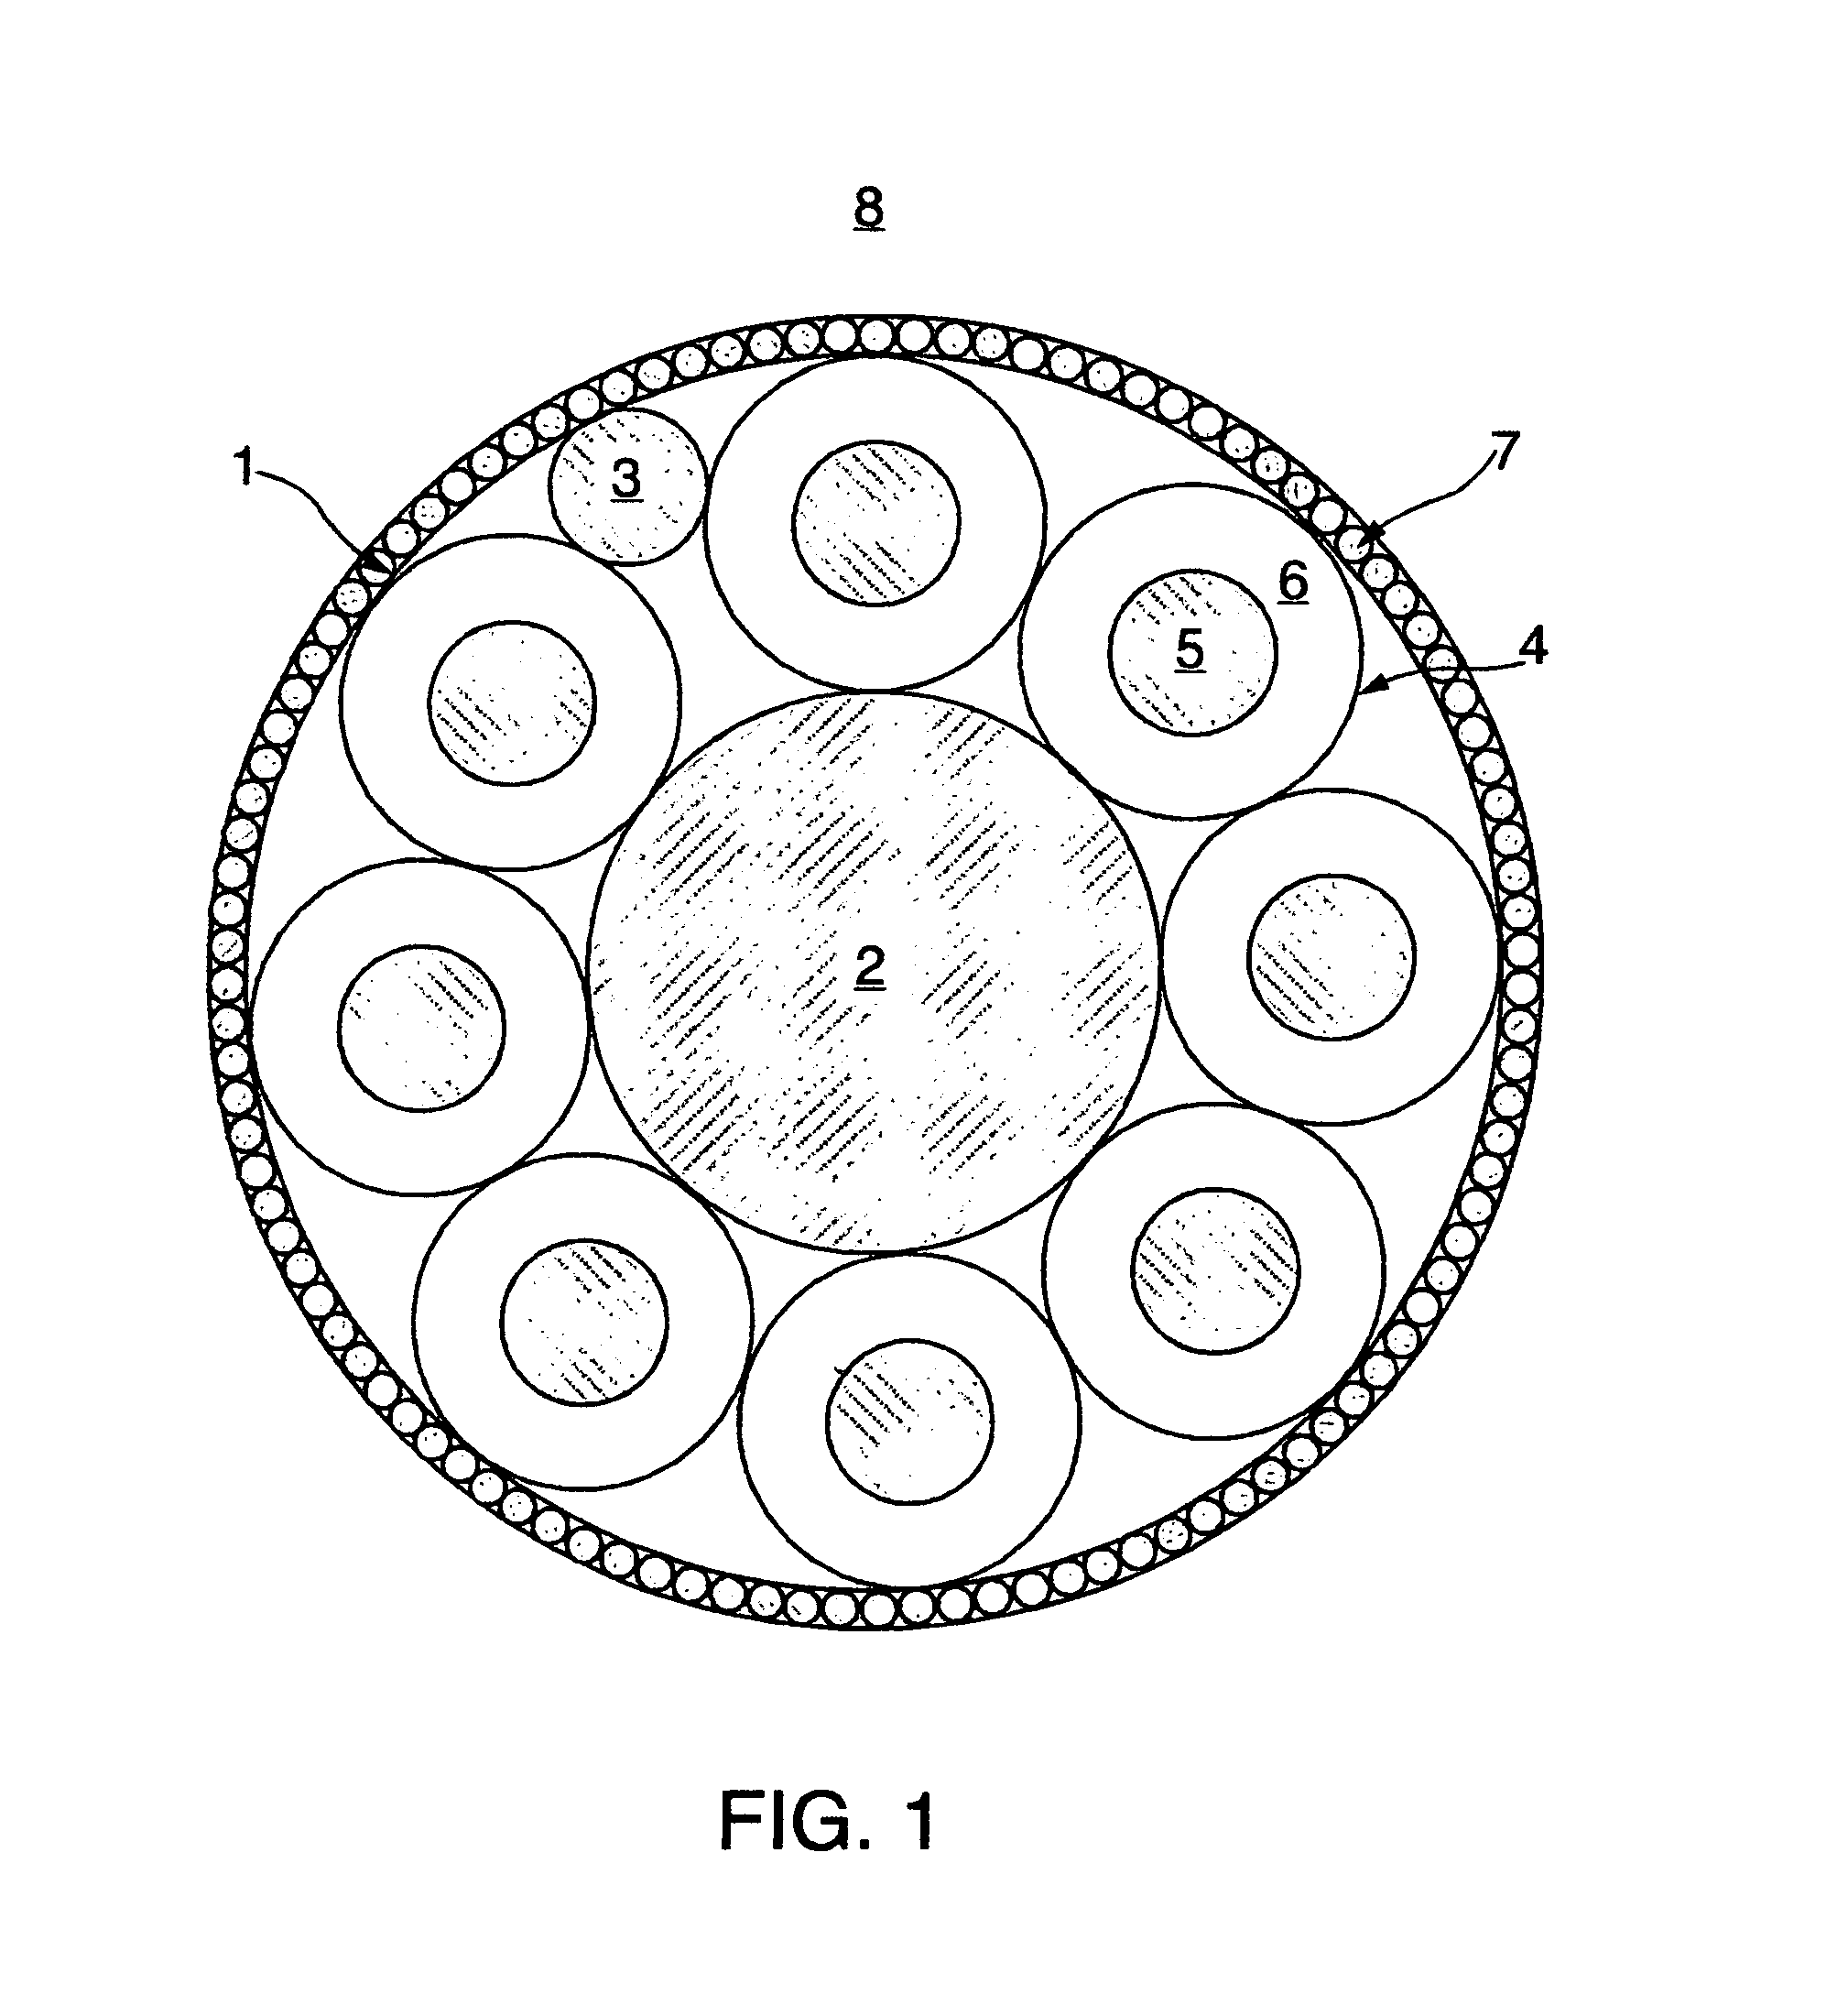 Heat resistant self extinguishing communications cable and cord